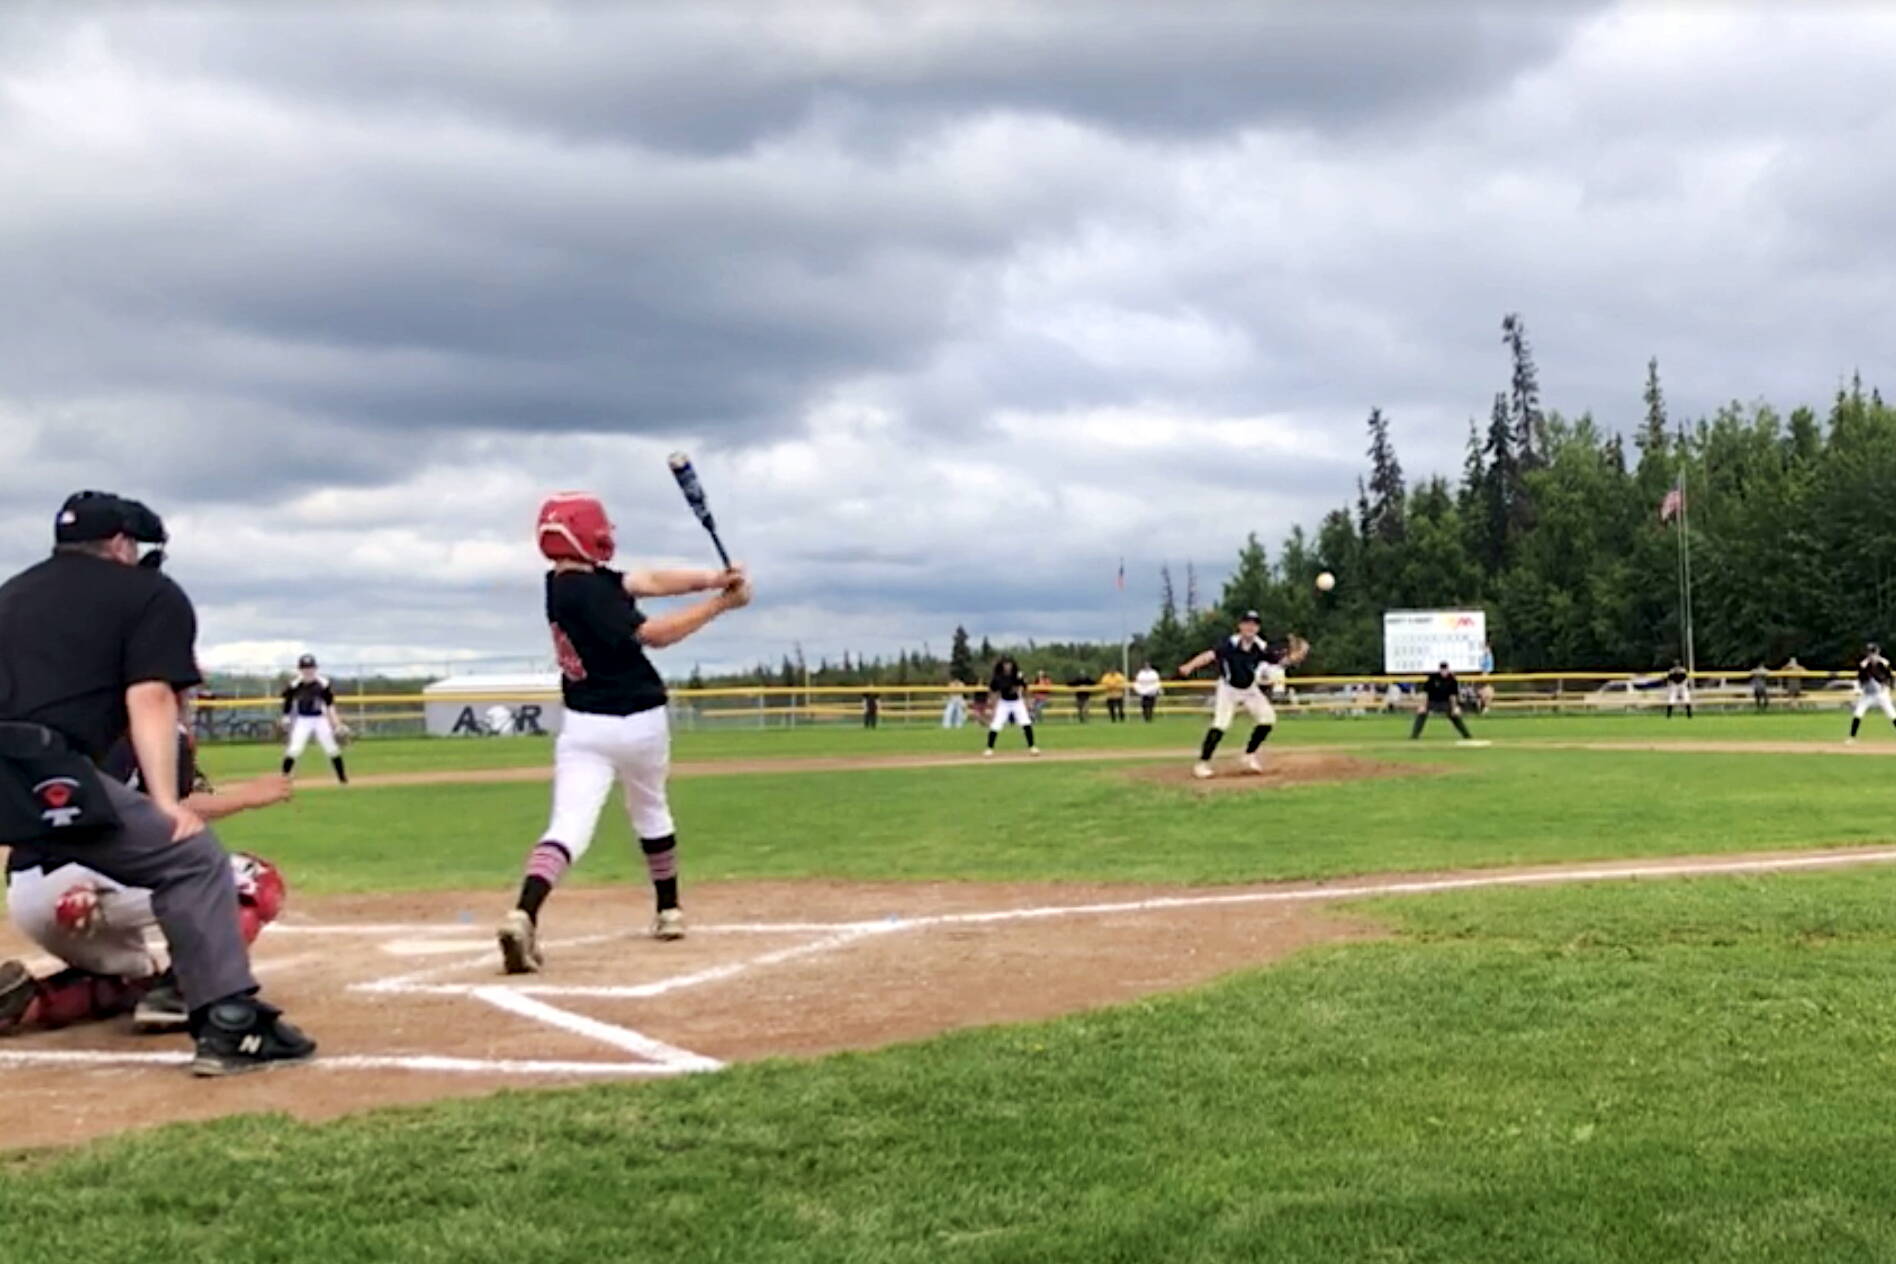 Juneau 14U team excels on way to state title